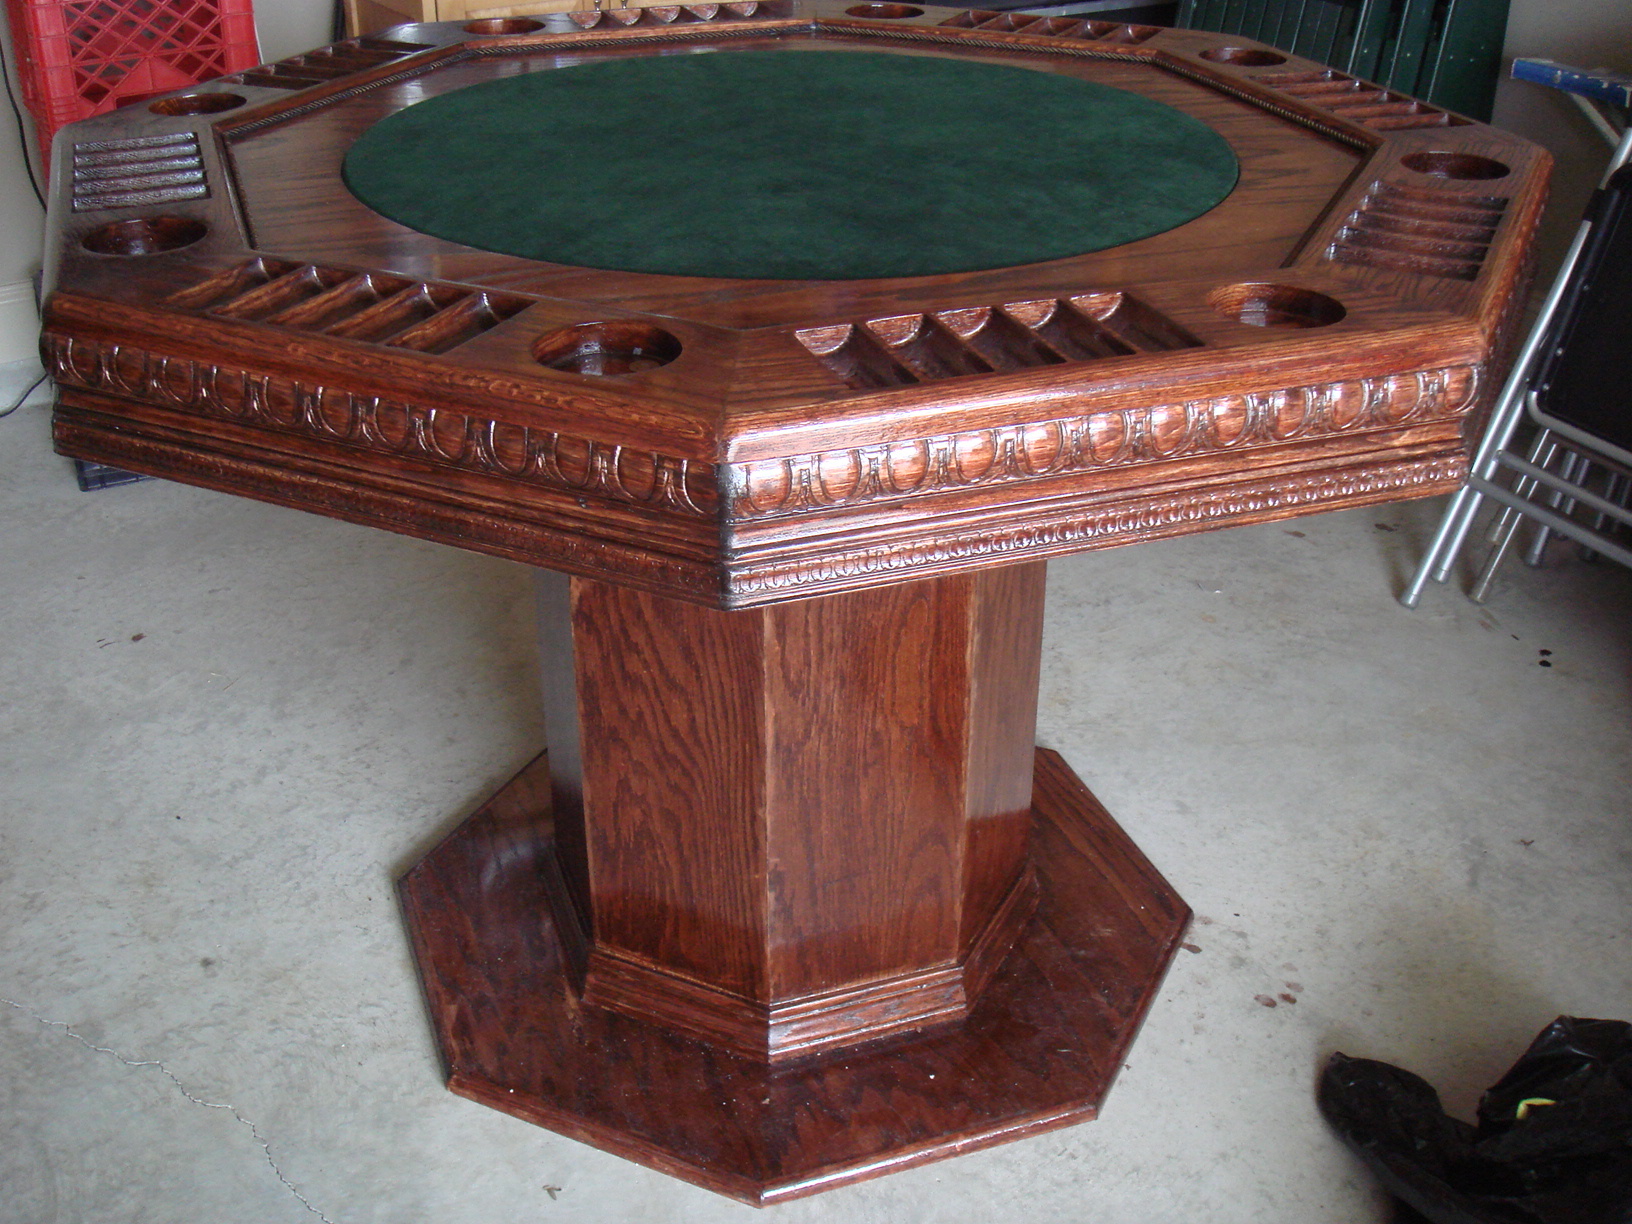 Solid wood poker table